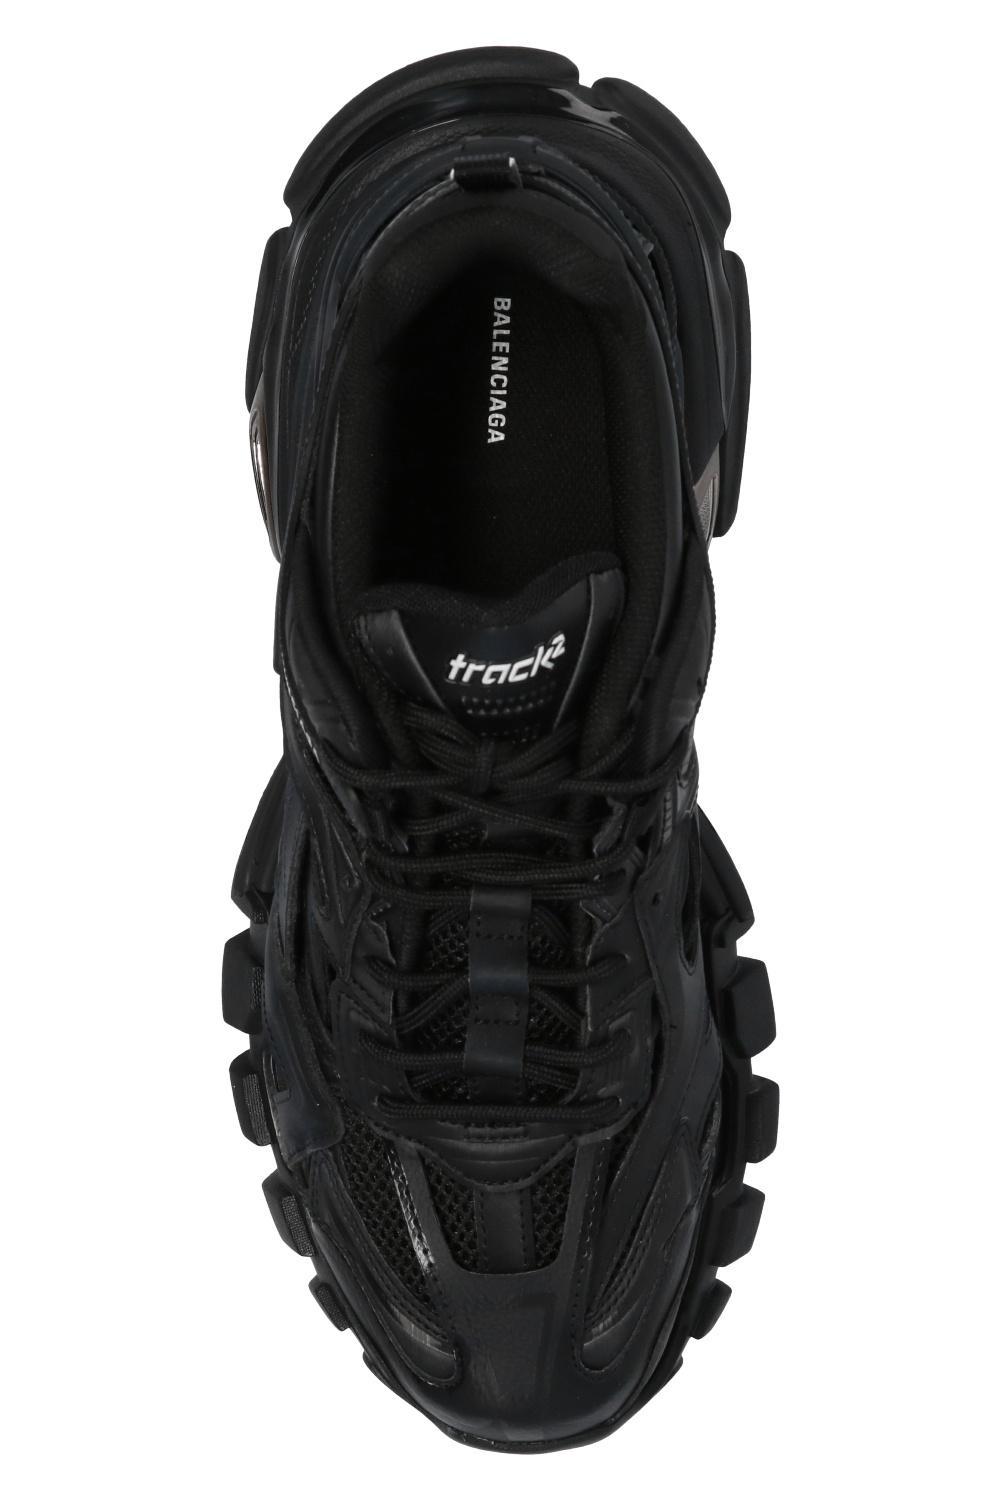 Balenciaga Rubber Black Track Trainers for Men - Save 31% | Lyst